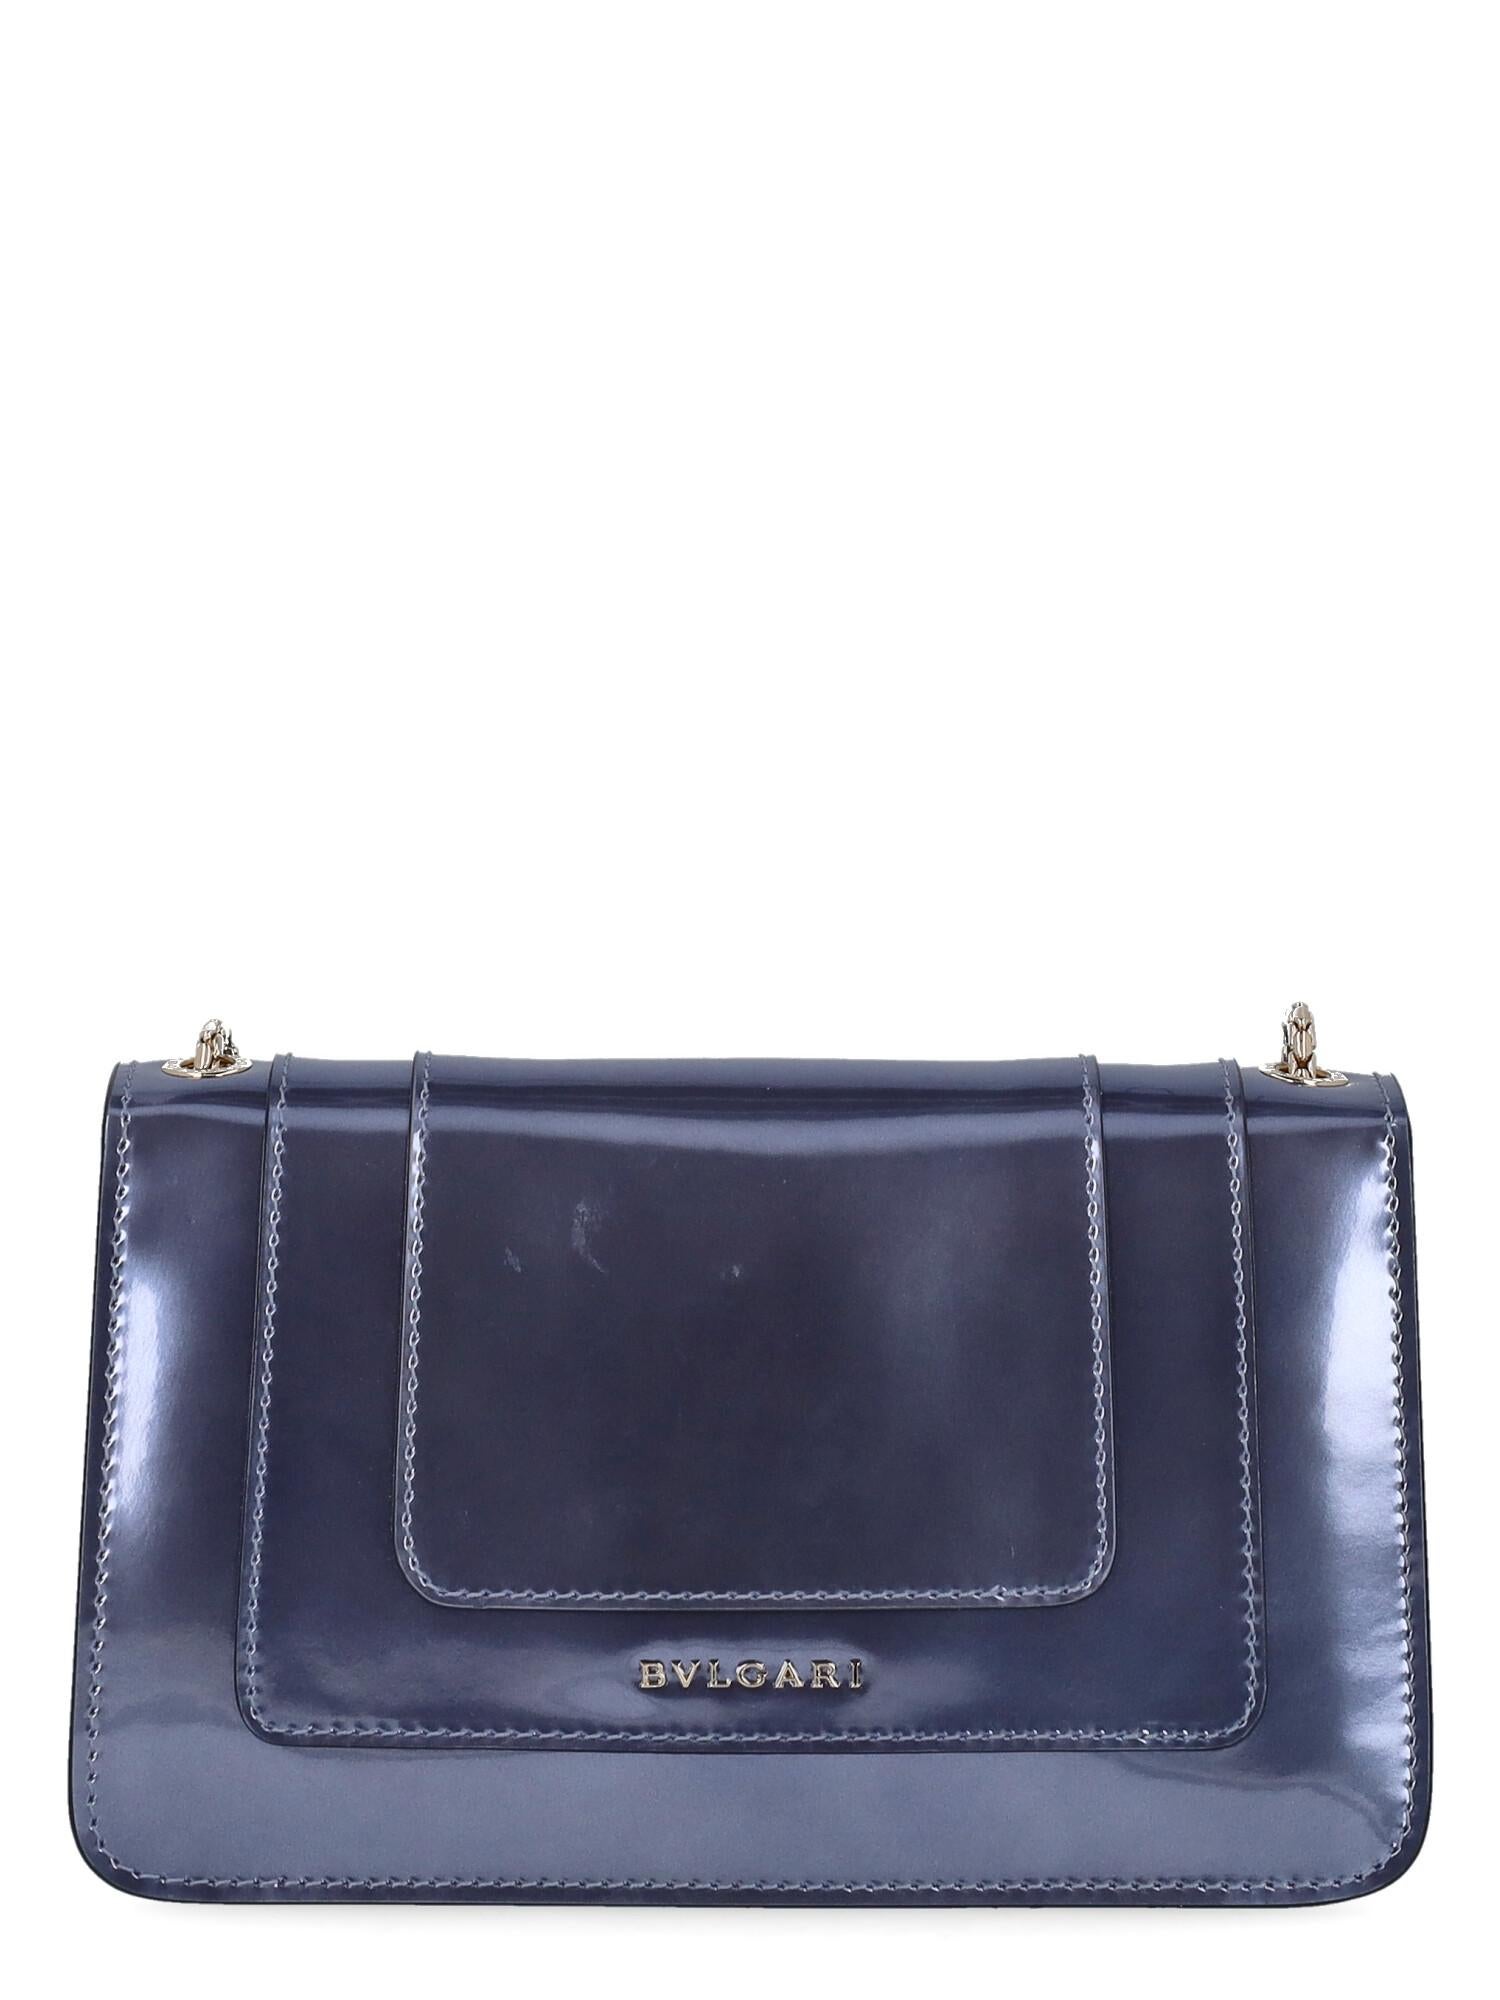 Bulgari Women Shoulder bags Blue Leather  In Good Condition For Sale In Milan, IT